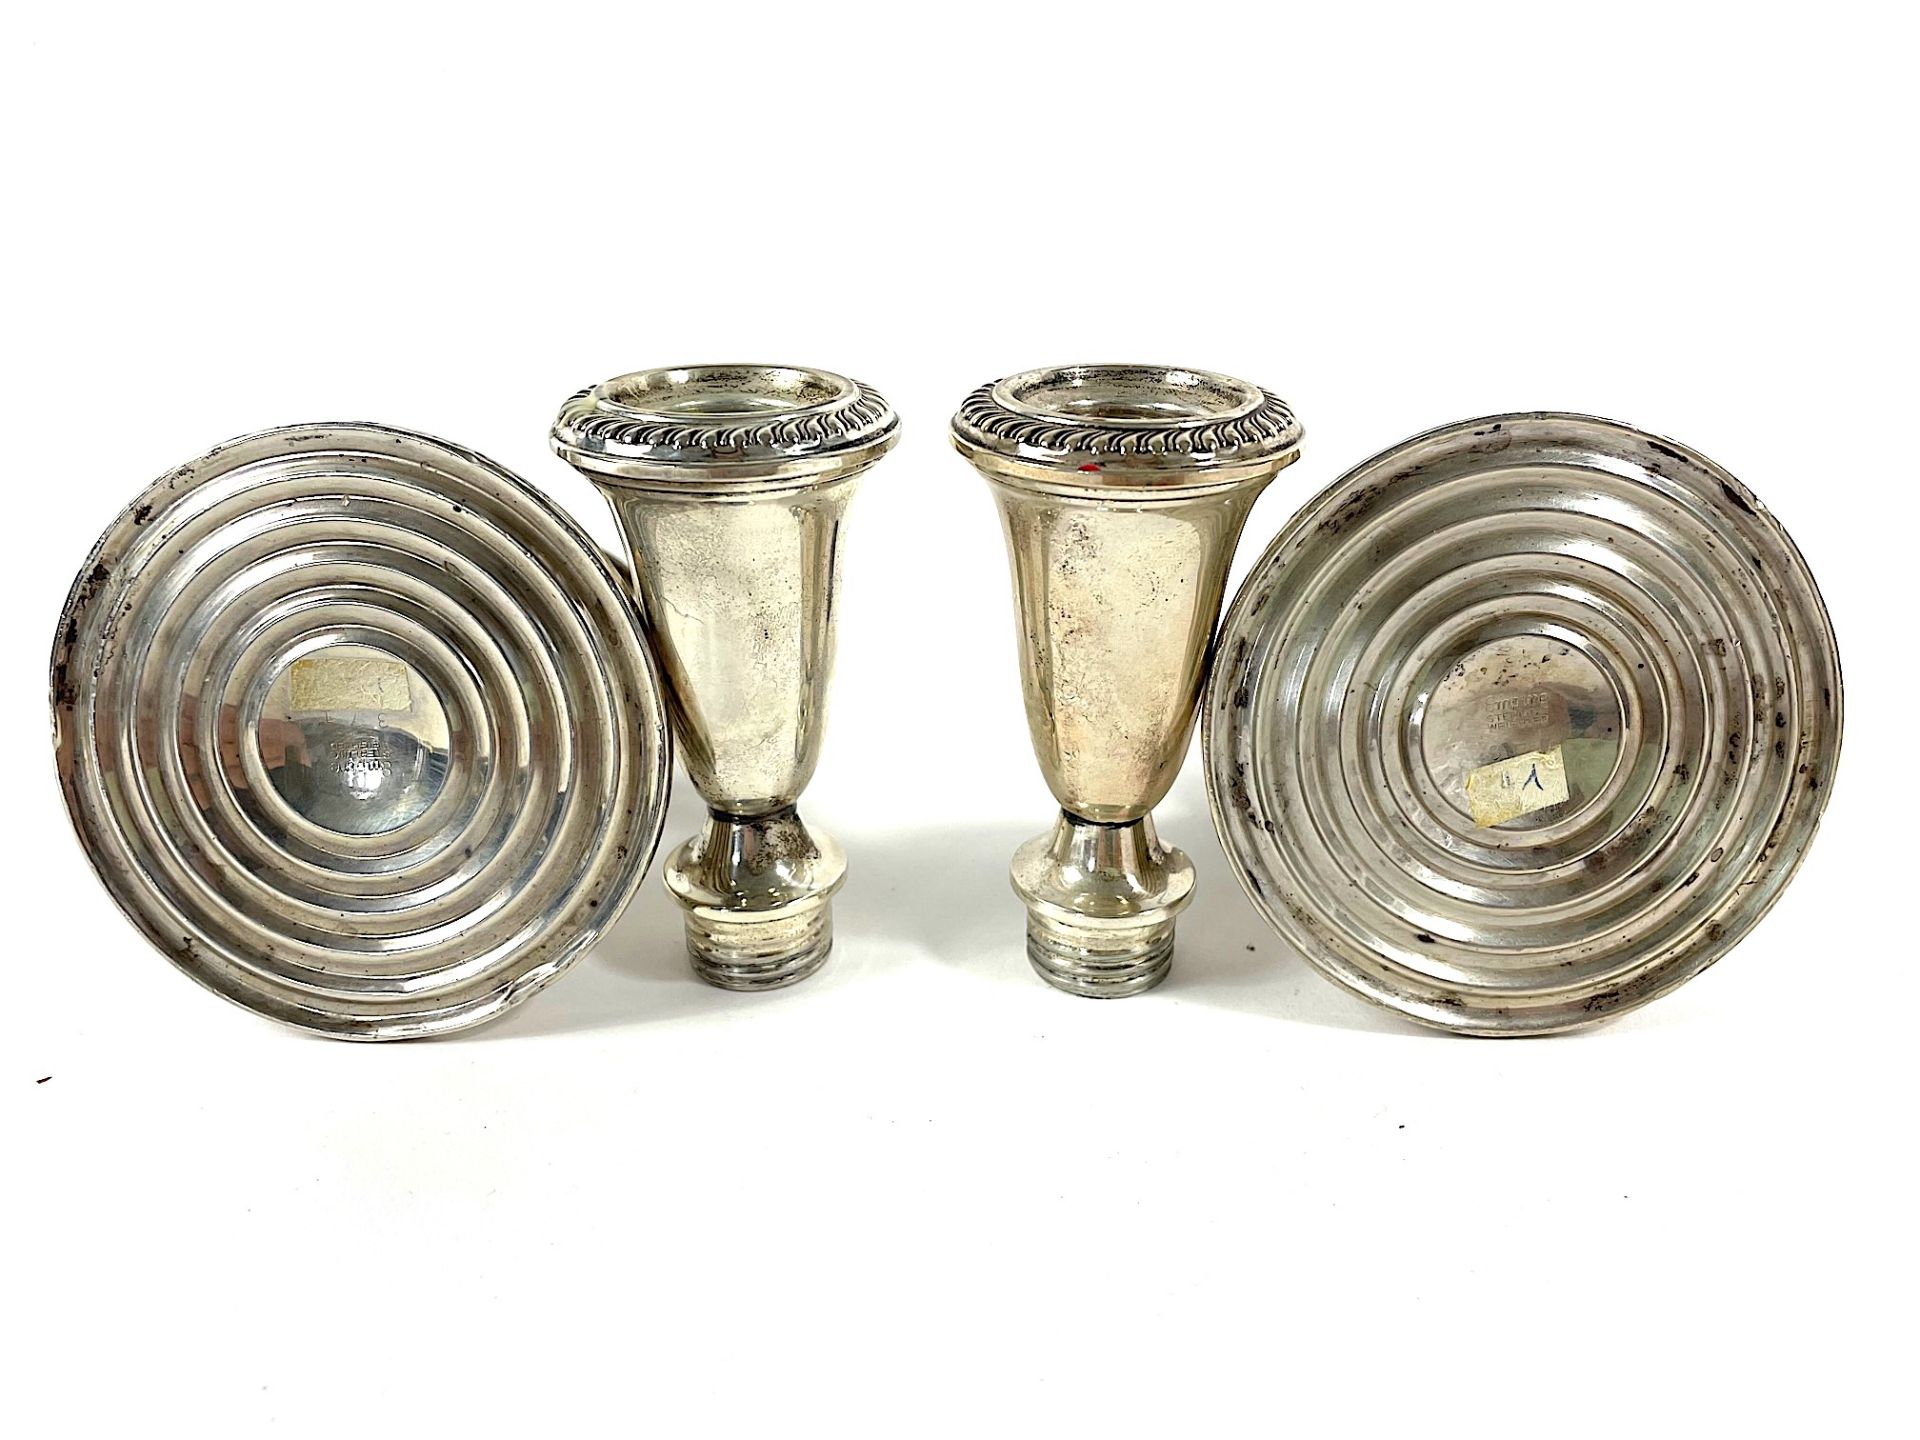 2 candlesticks 925 silver - Image 6 of 8